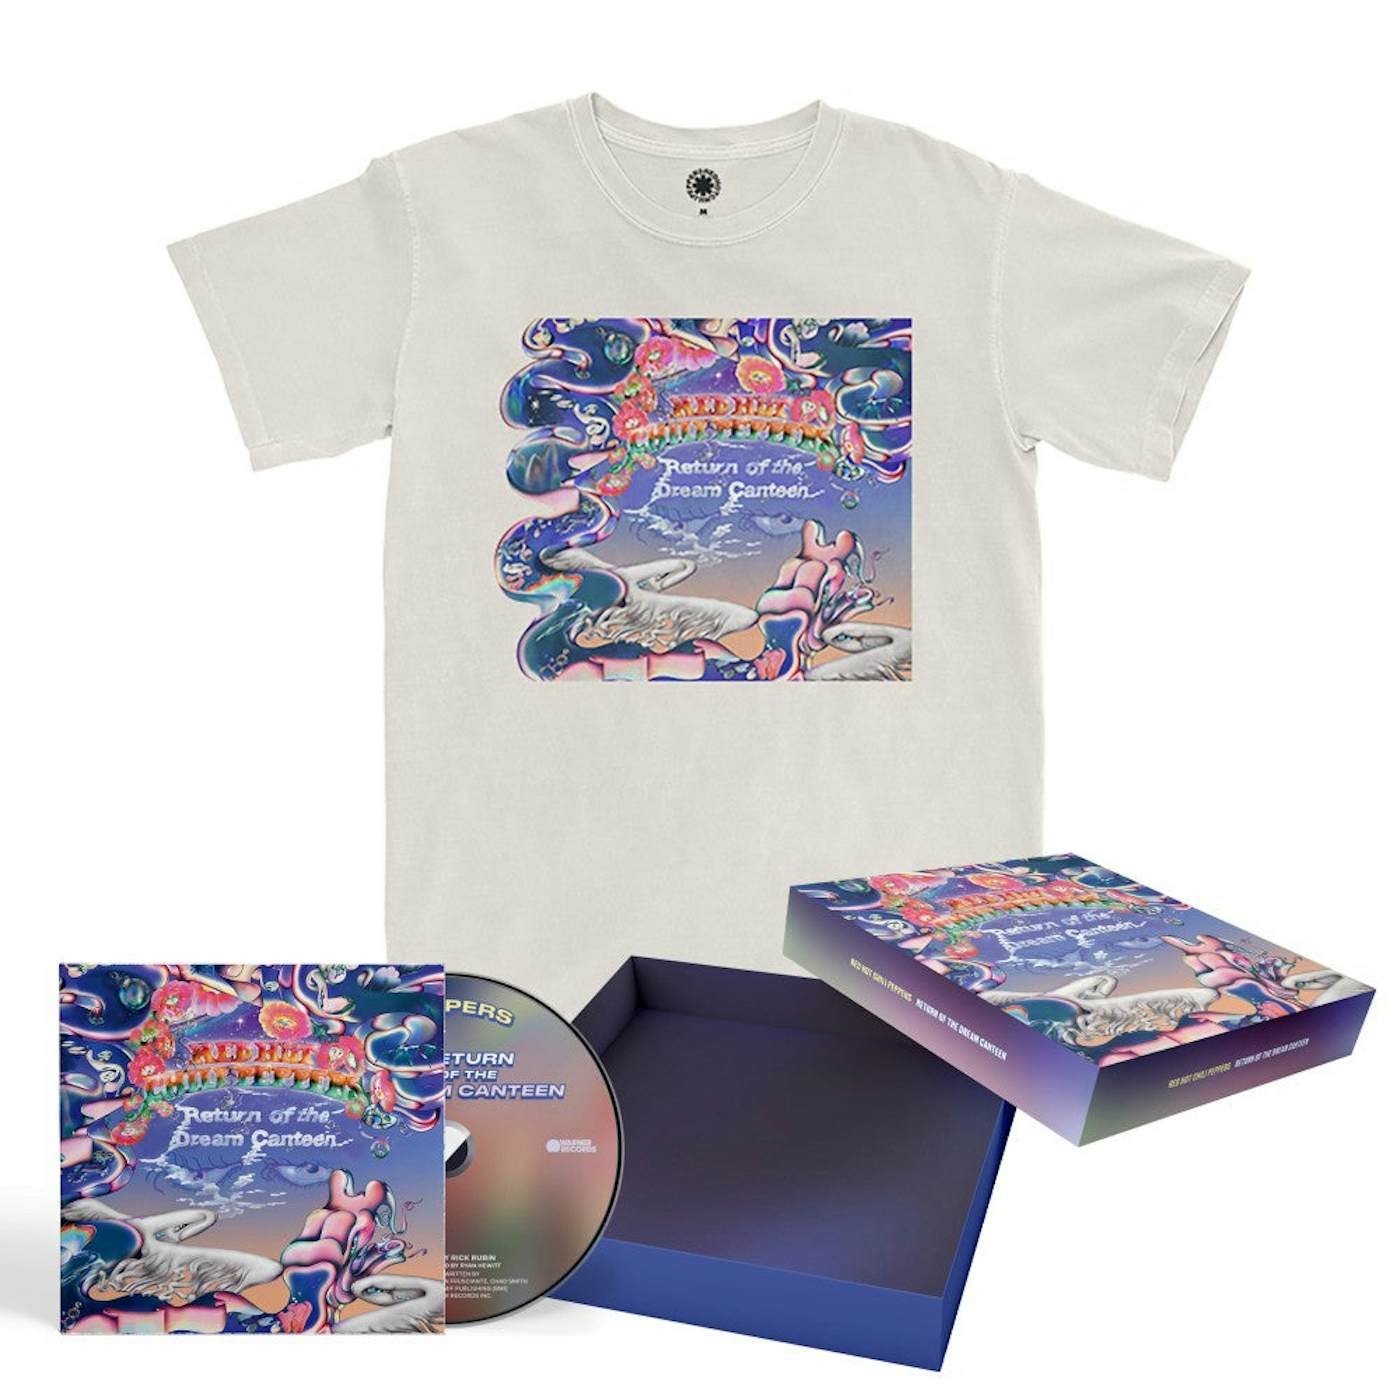 Red Hot Chili Peppers Return of the Dream Canteen LIMITED T-SHIRT + CD BOX